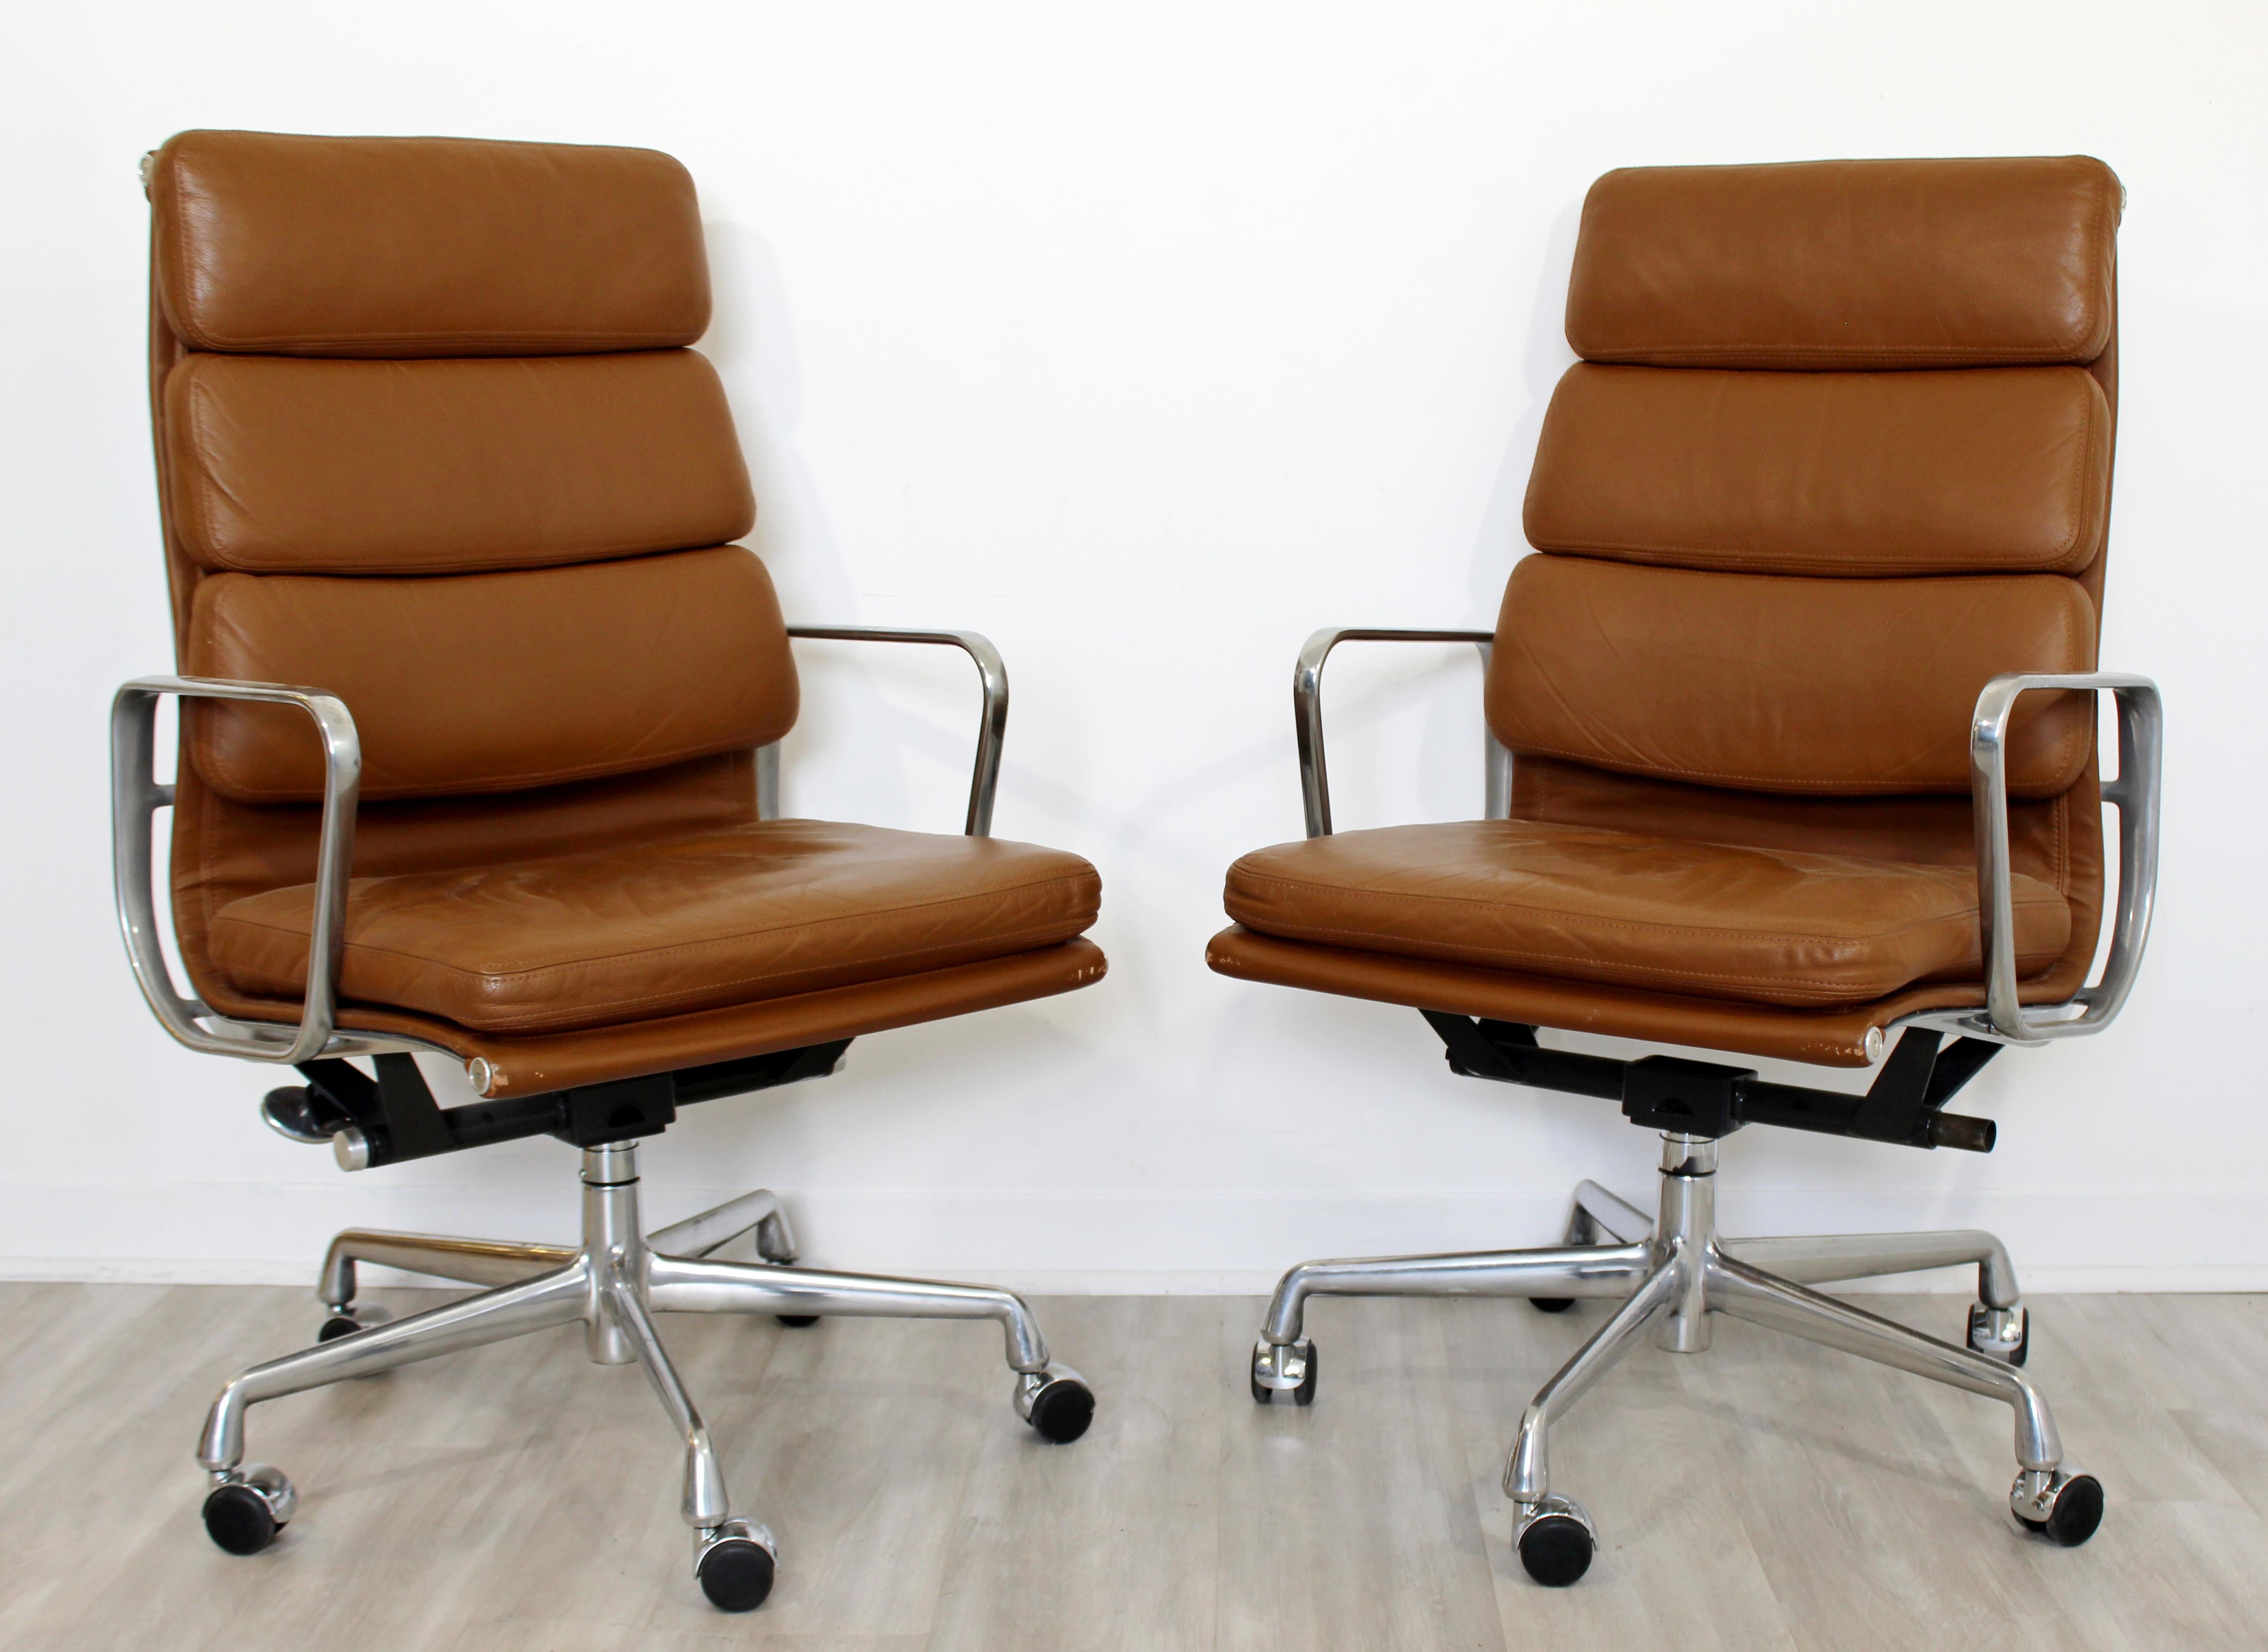 For your consideration is a magnificent, soft pad, rolling office chair, upholstered in brown or tan leather, by Eames for Herman Miller, circa 2001. In excellent condition. The dimensions are 22